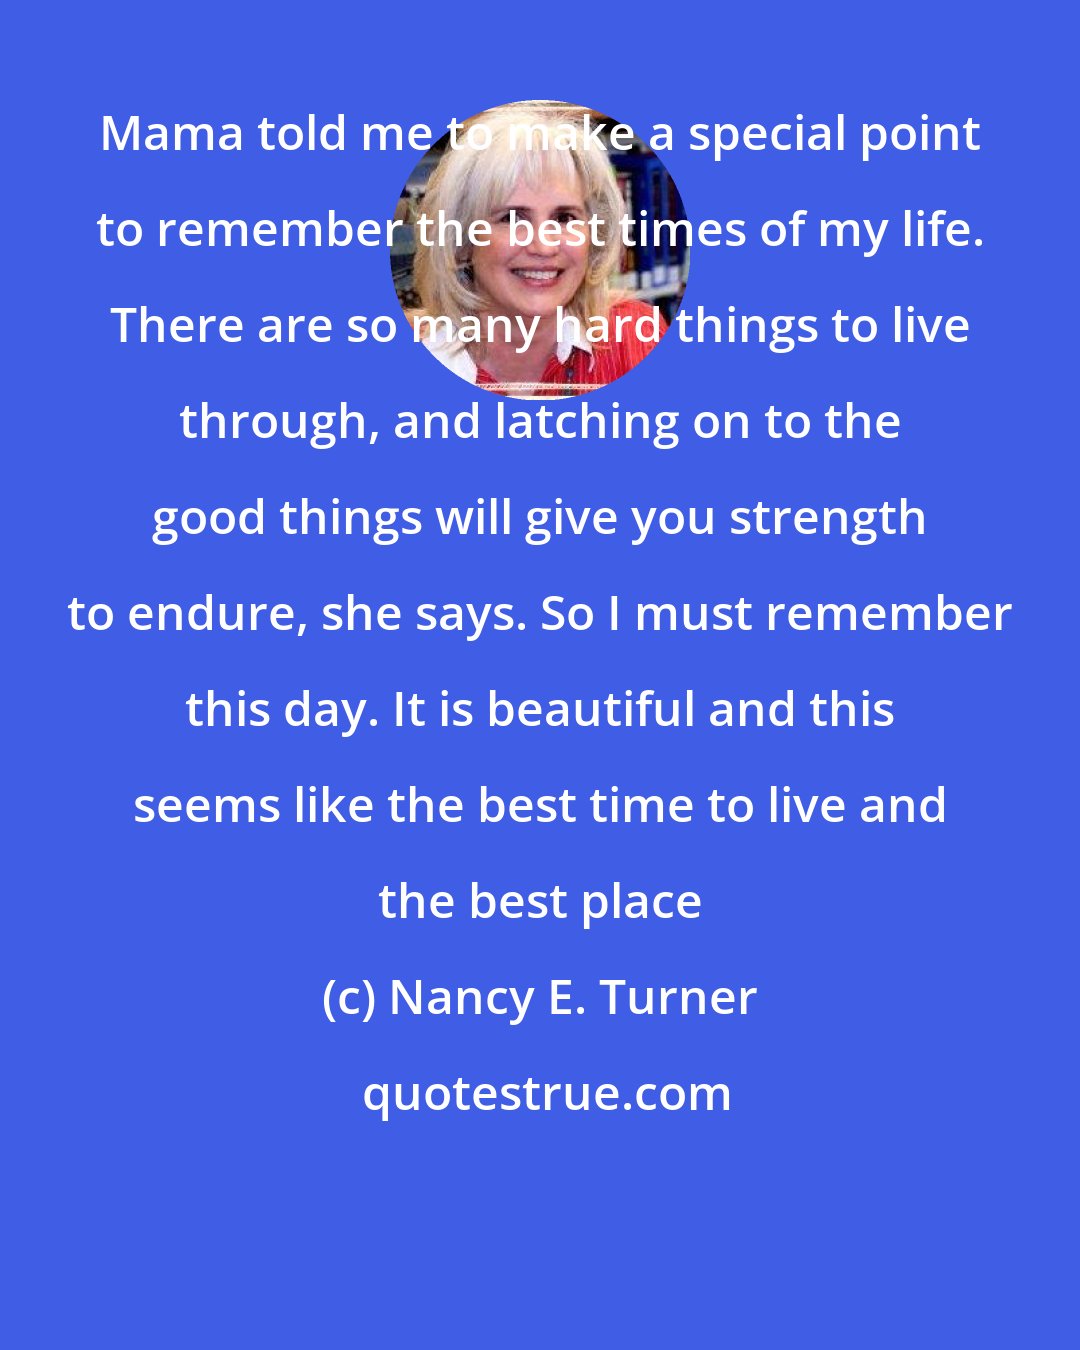 Nancy E. Turner: Mama told me to make a special point to remember the best times of my life. There are so many hard things to live through, and latching on to the good things will give you strength to endure, she says. So I must remember this day. It is beautiful and this seems like the best time to live and the best place